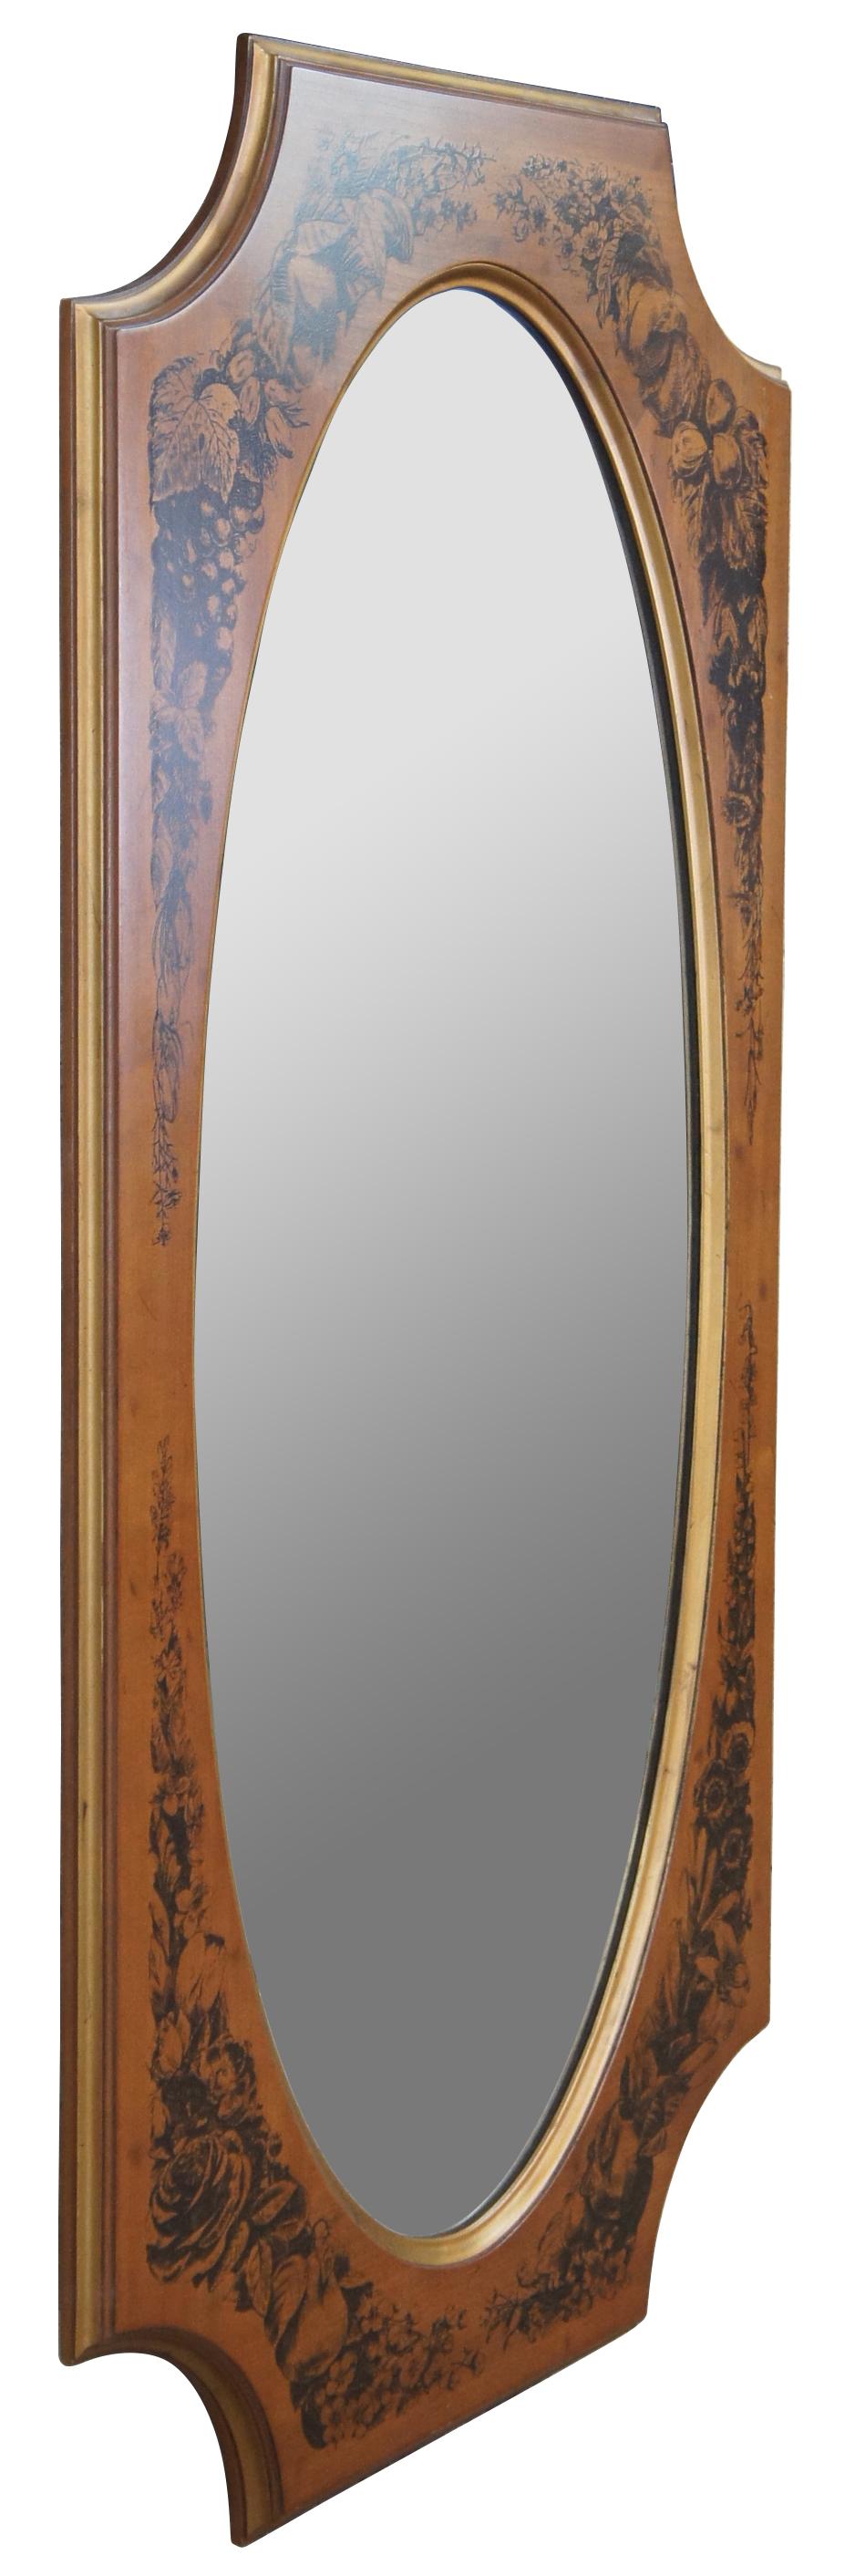 Circa 1960s Drexel Heritage Modavanti Mediterranea Collection mirror, 14-141-30. Drawing inspiration from early renaissance, italian, classical and other European deisgns. A rectangular form from fruitwood with cut corners and oval mirror. Features